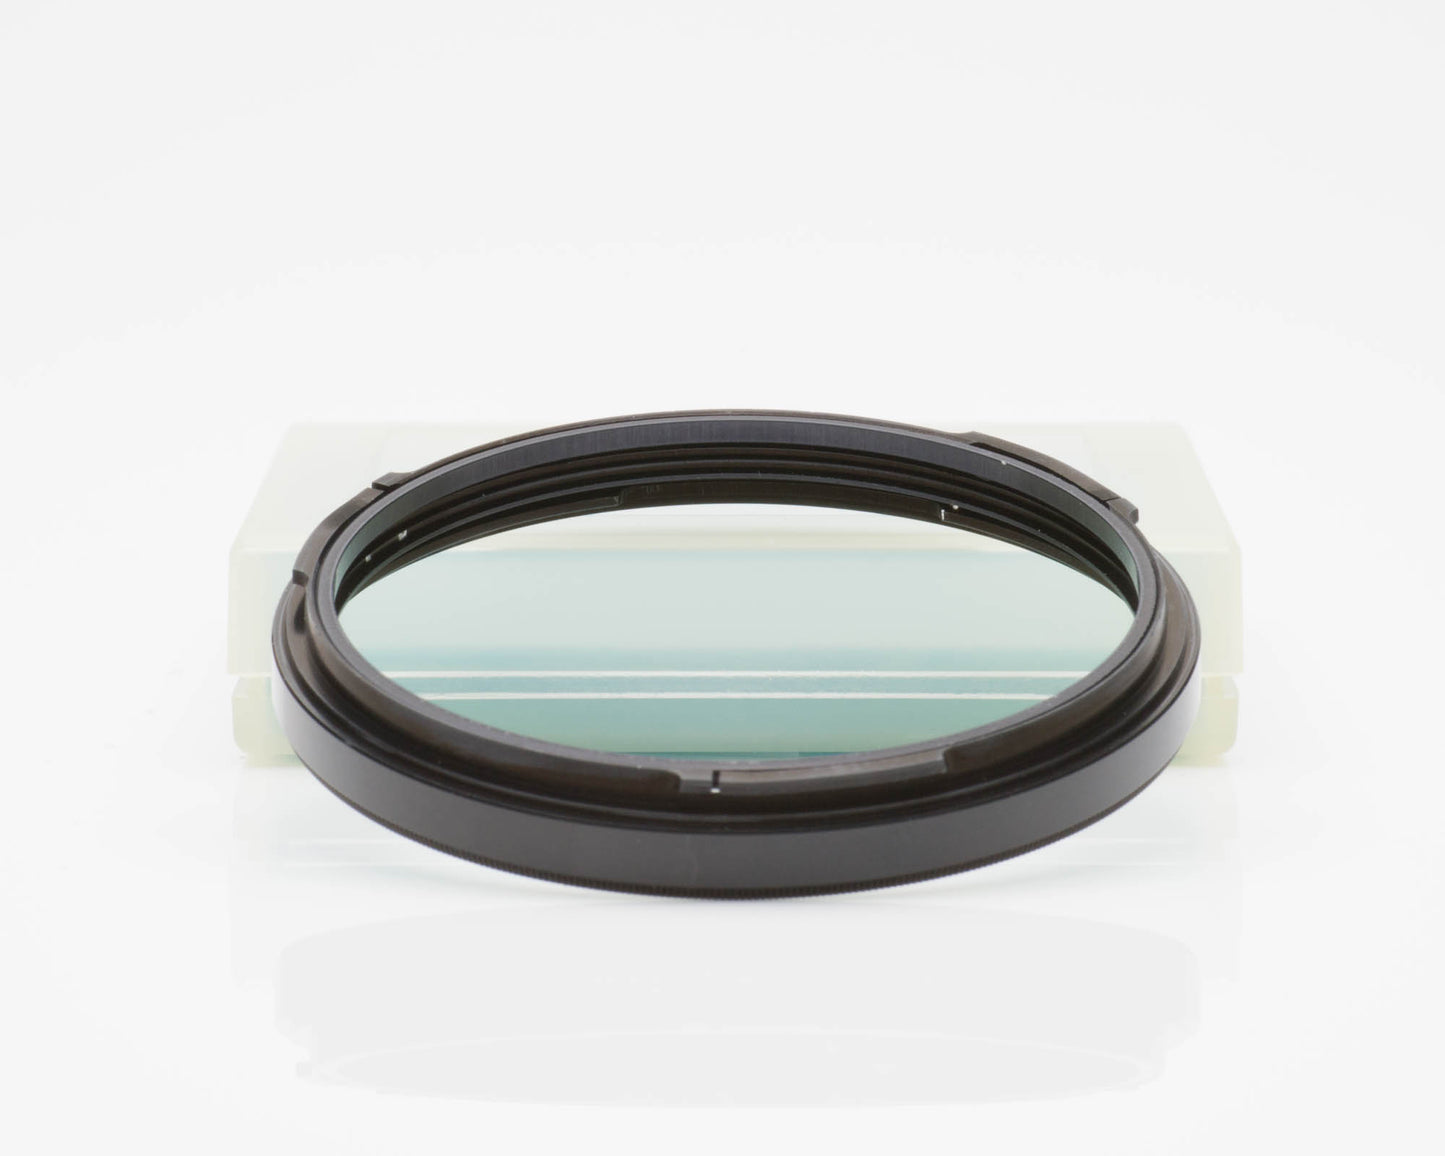 Hasselblad Glassless Filter Mount 51635